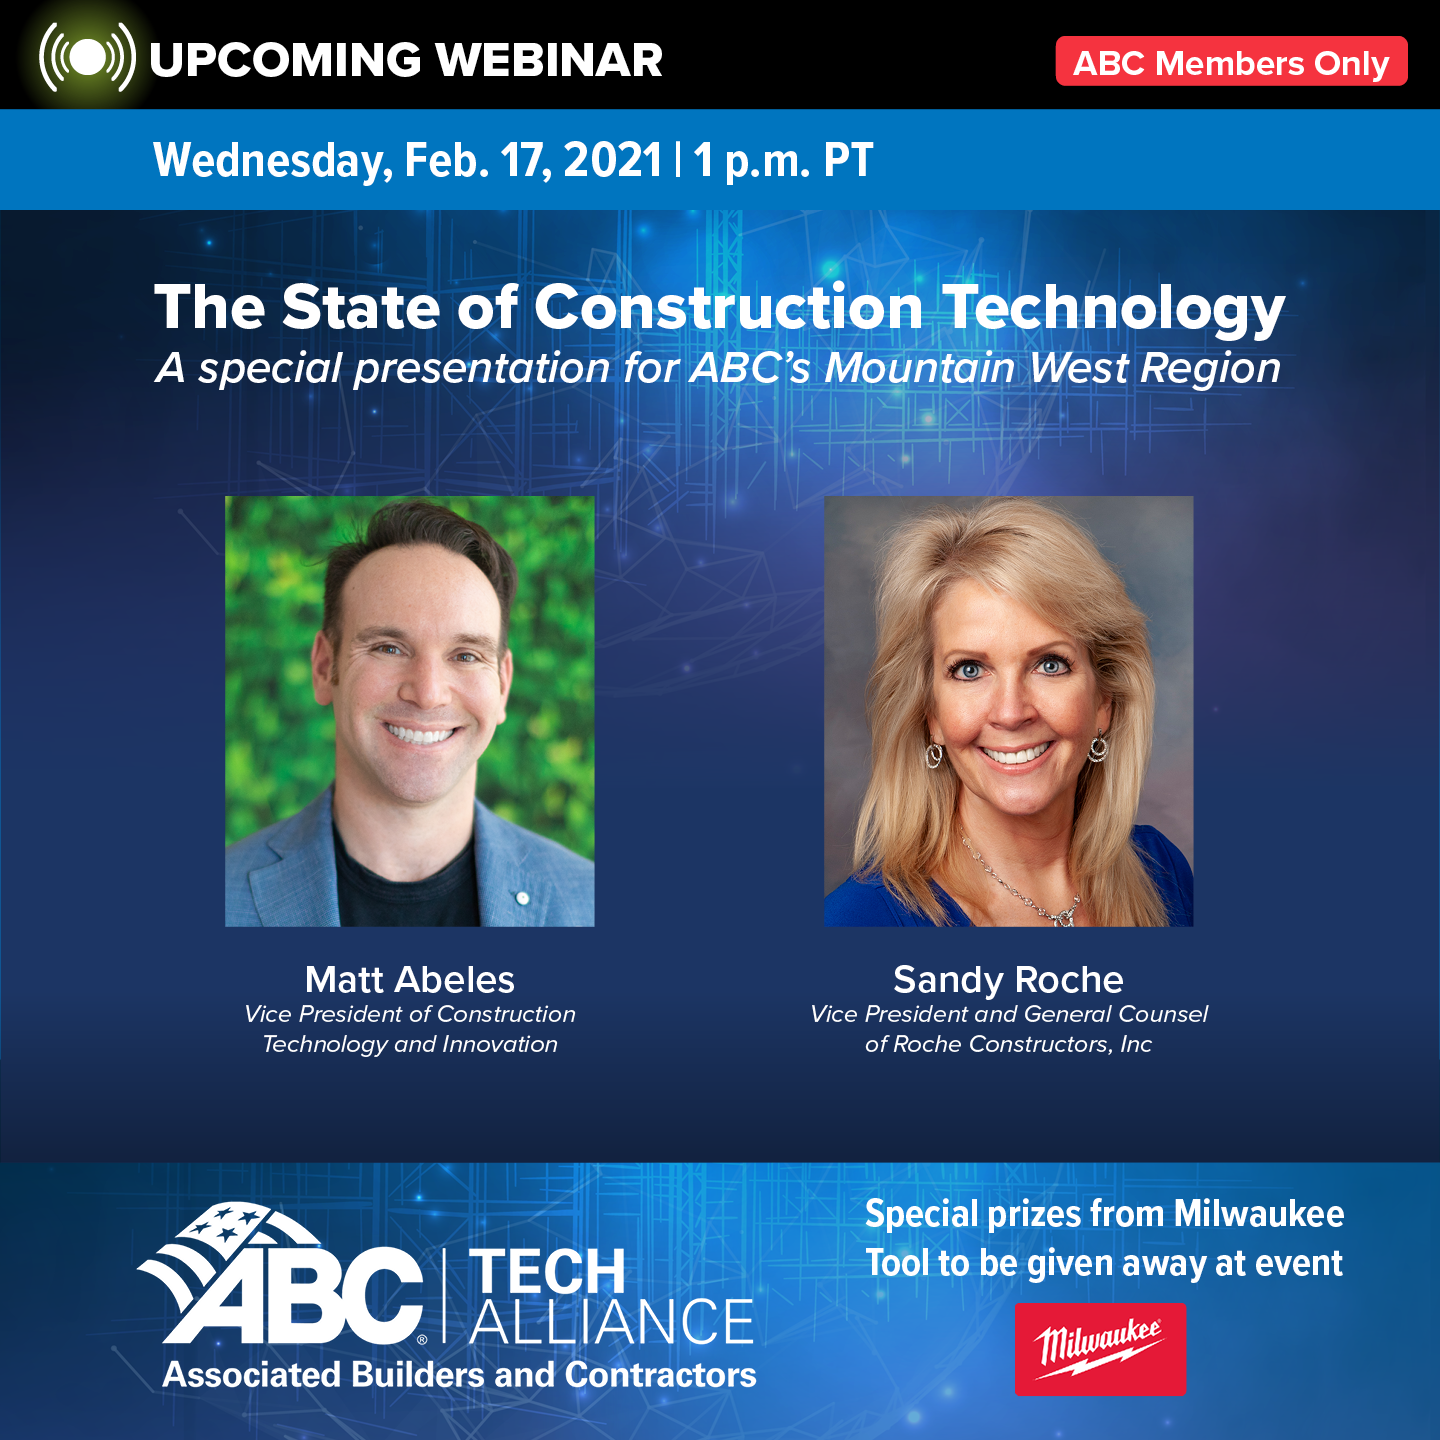 The State of Construction Technology